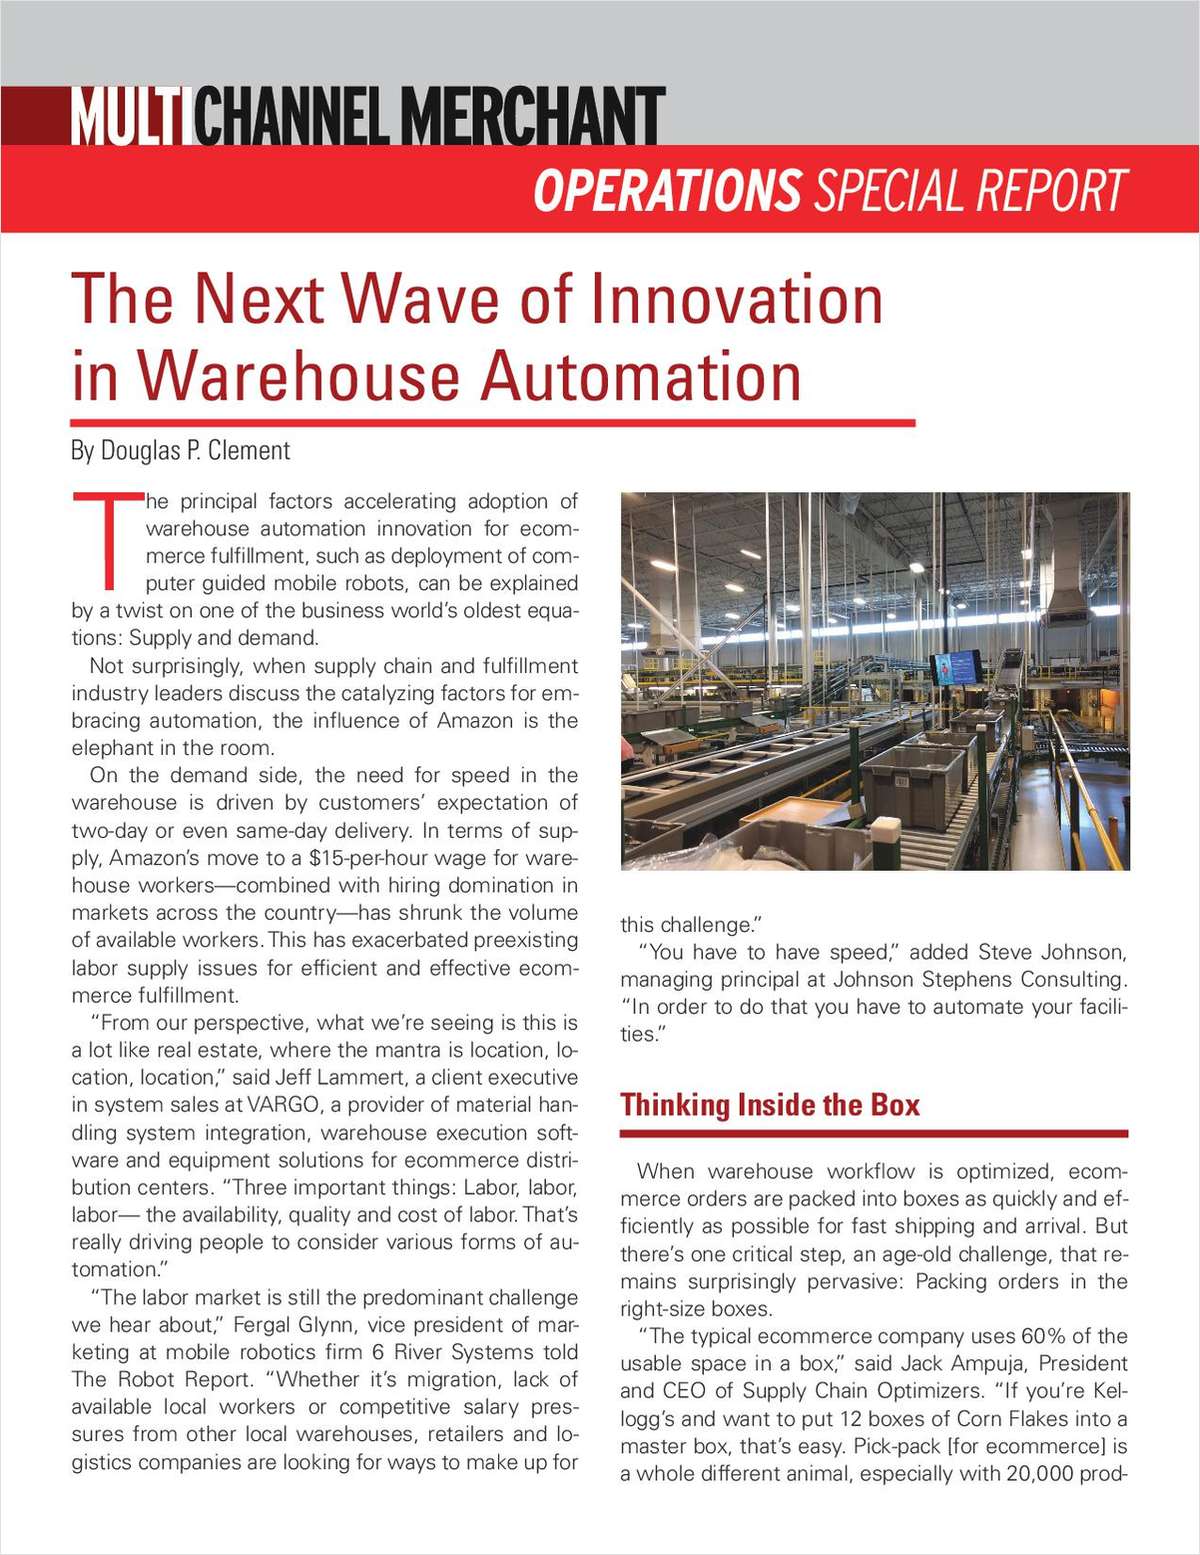 The Next Wave in Warehouse Automation